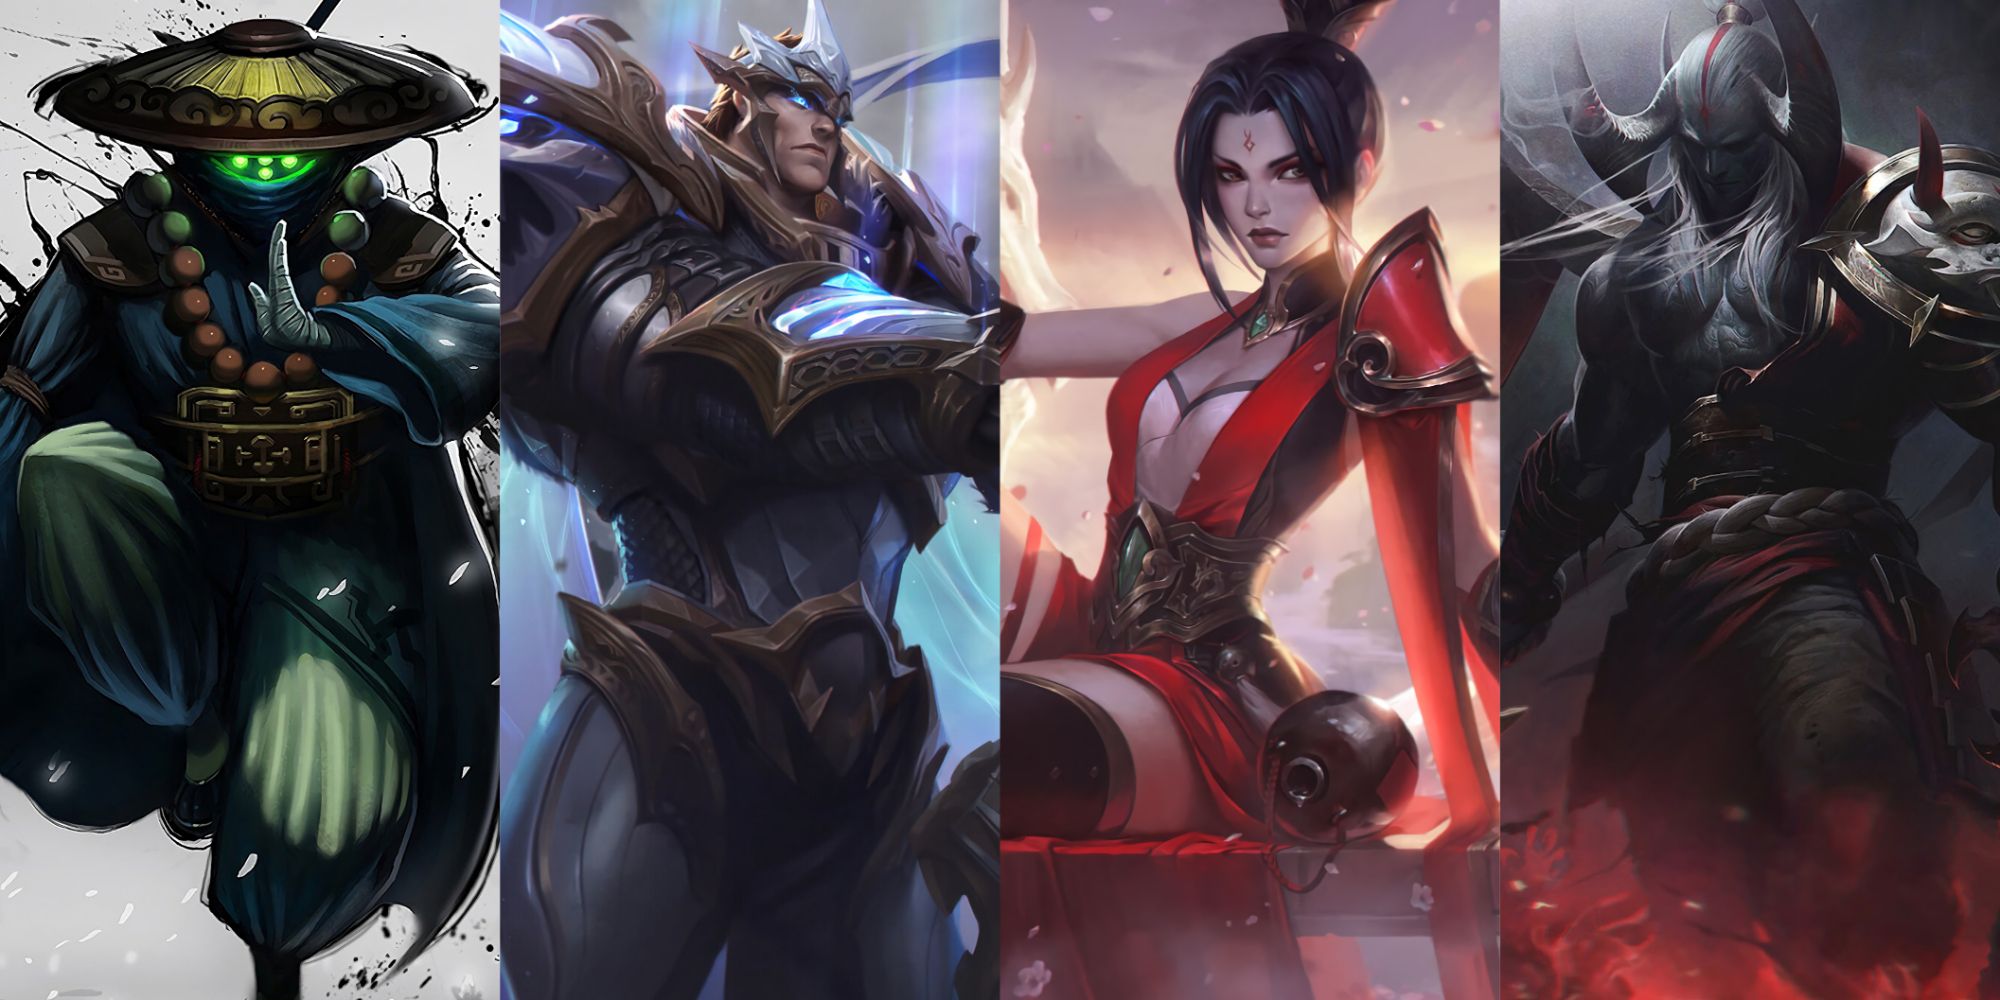 Top Laners Cover featuring from left to right: Temple Jax, God King Garen, Soaring Sword Riven, and Blood Moon Aatrox